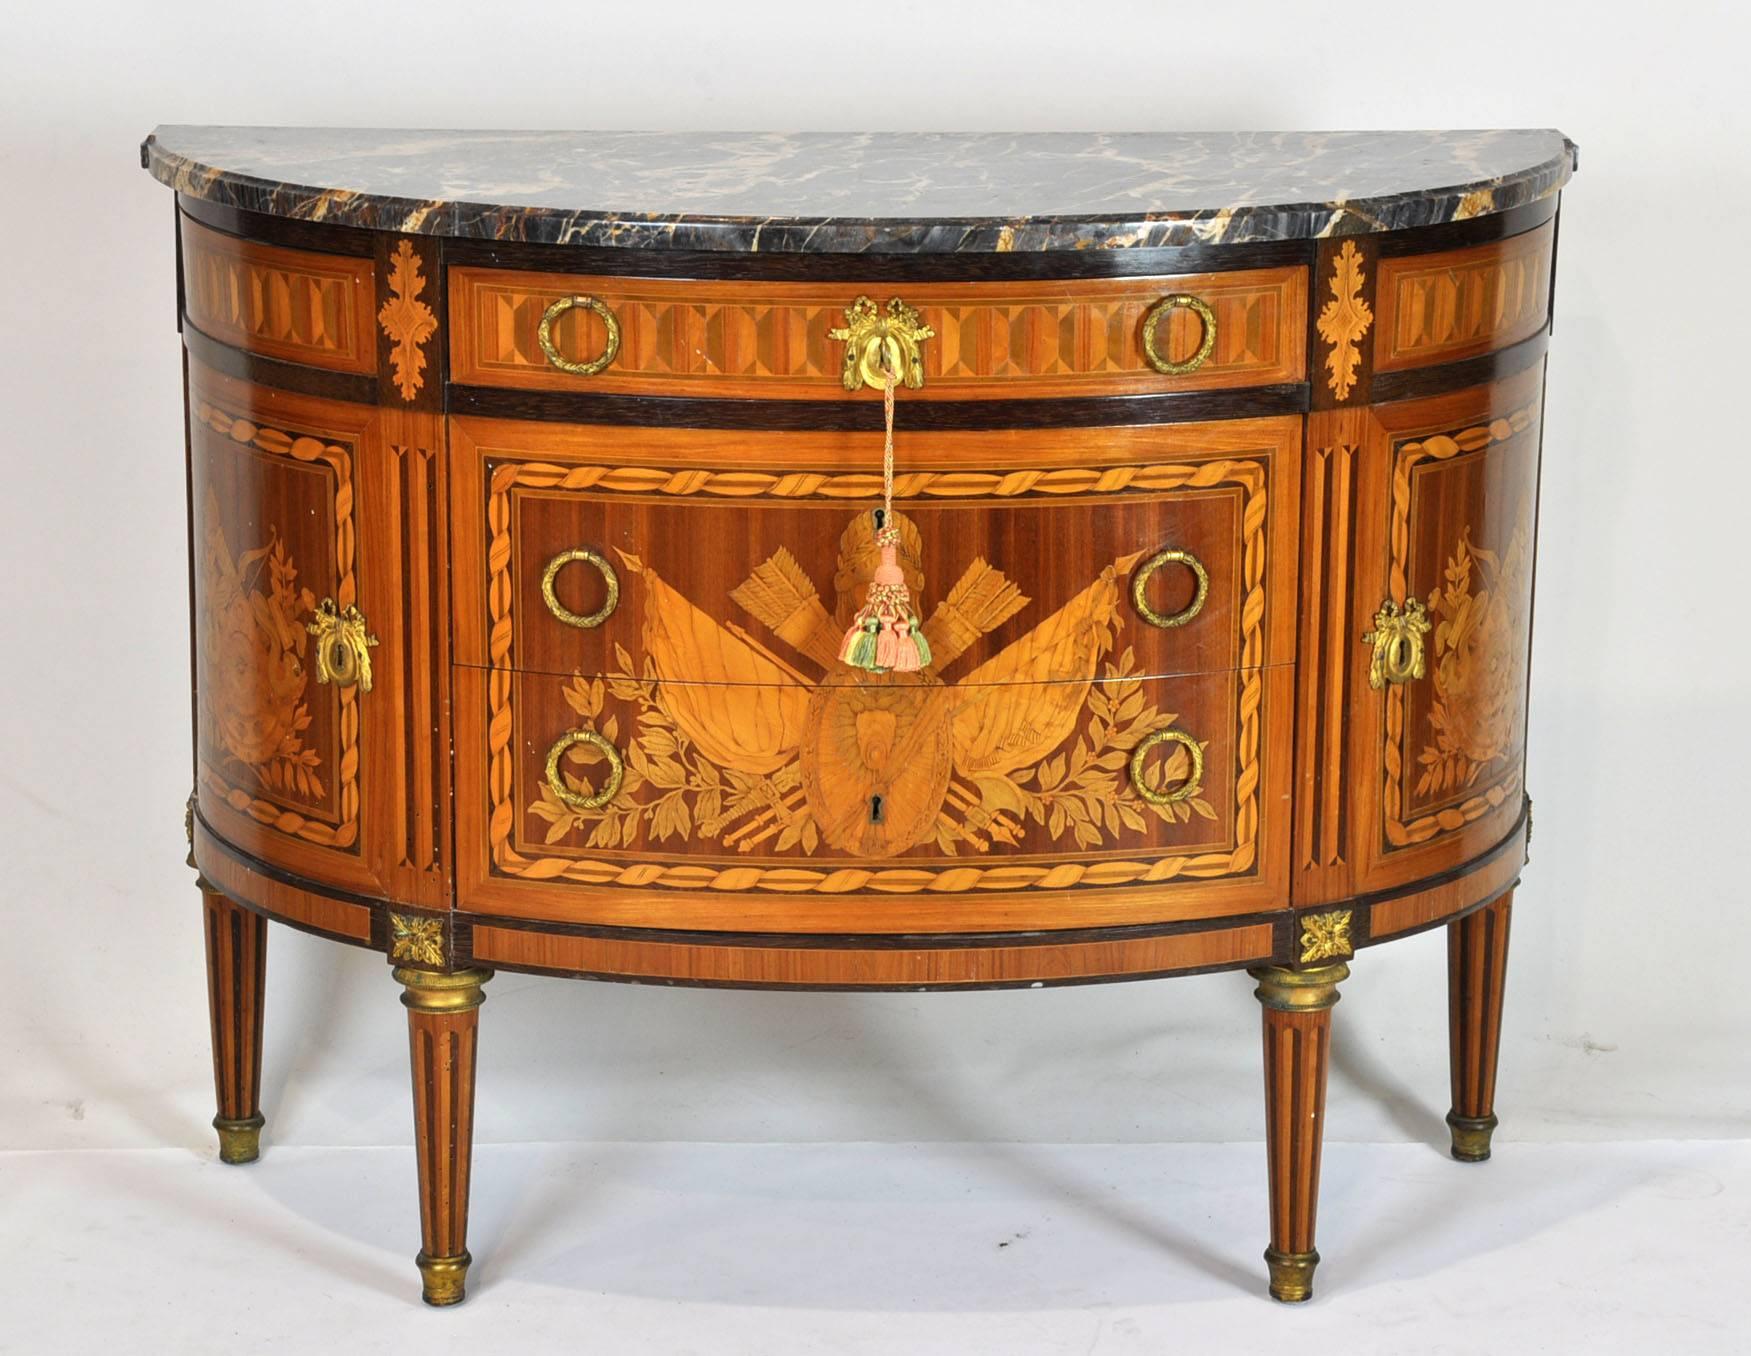 Inlaid demilune cabinets from the mid-20th century. Bronze mounts. Very well made. Made in Portugal by the Foundation Ricardo Do Espirito Santo Silva using centuries-old mystery and traditions. Stamped on top.